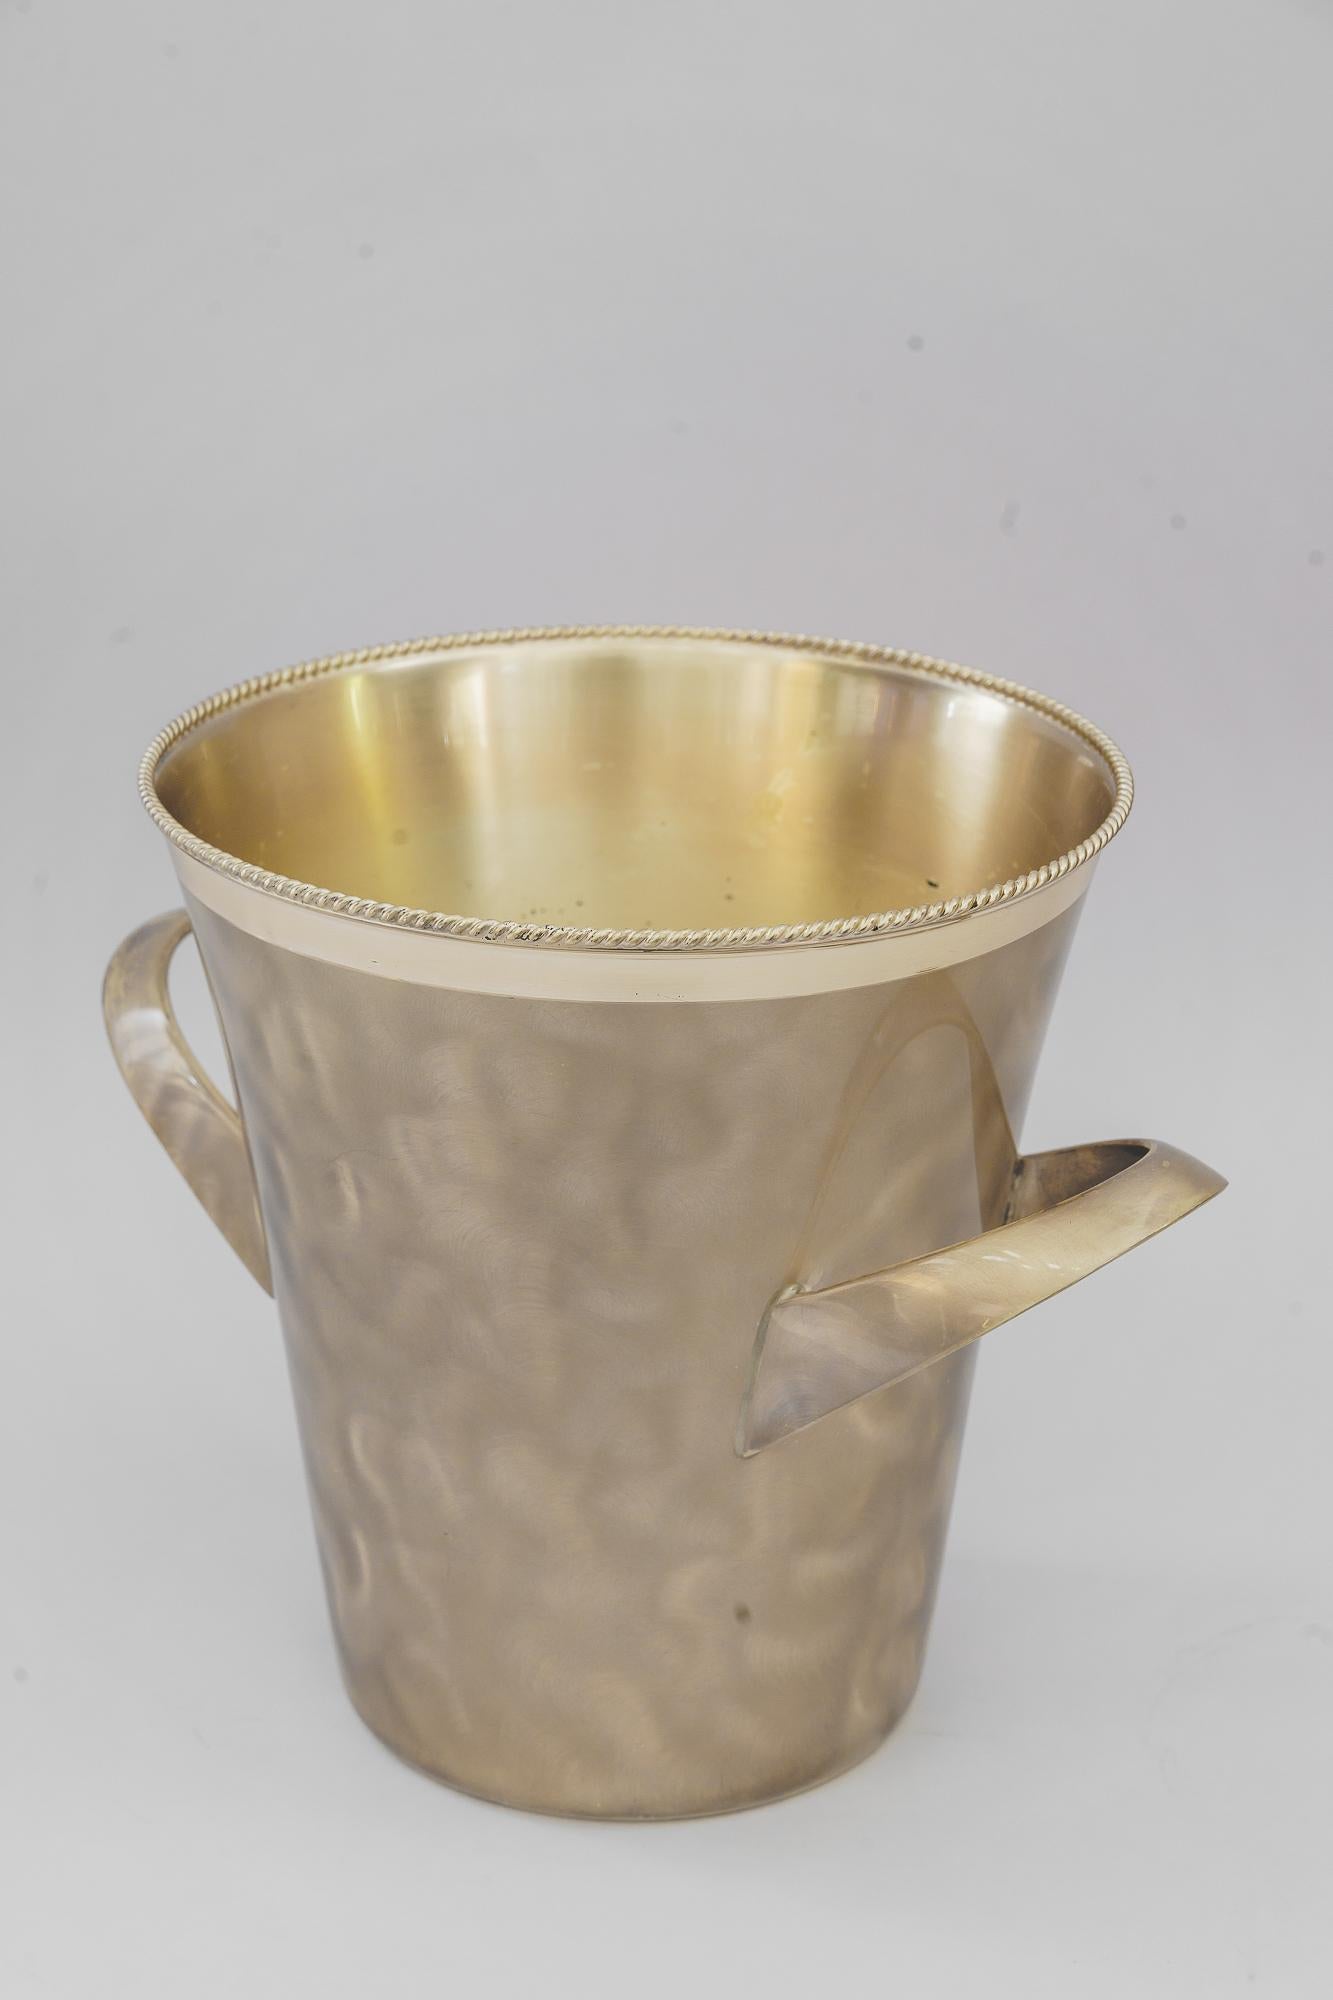 Silvered Art Deco Champagne Cooler, by Kurt Mayer 1960s ( marked by WMF )
without handles 21cm
with handles 27cm
Original condition